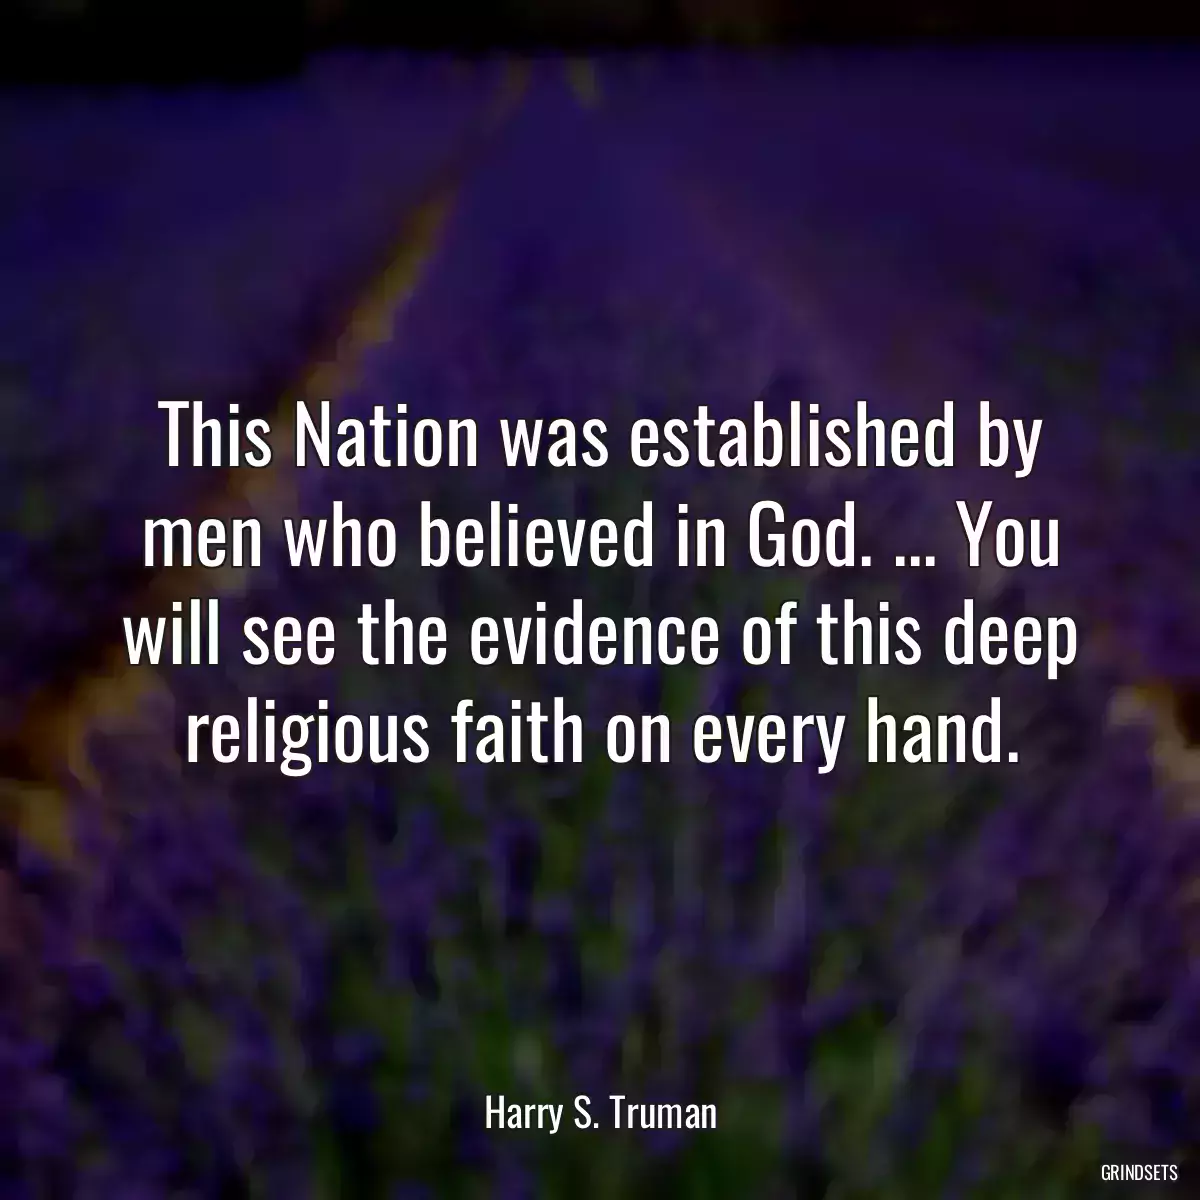 This Nation was established by men who believed in God. ... You will see the evidence of this deep religious faith on every hand.